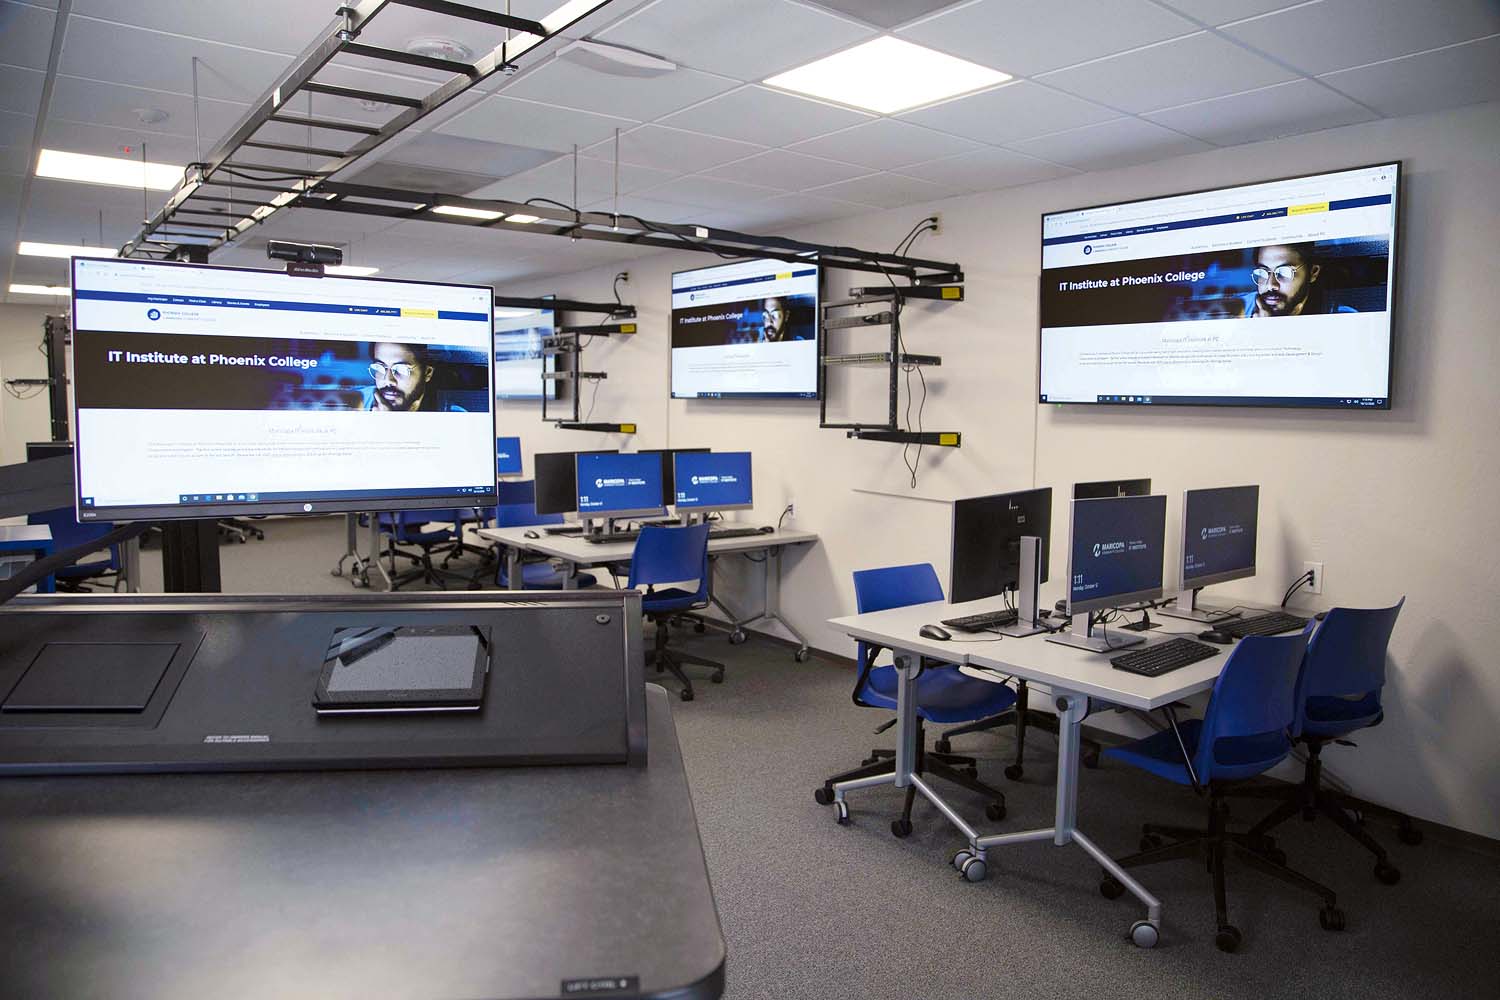 View of the networking lab, looking from the instructor station across the room at several of the student work pods and overhead network cable trays.